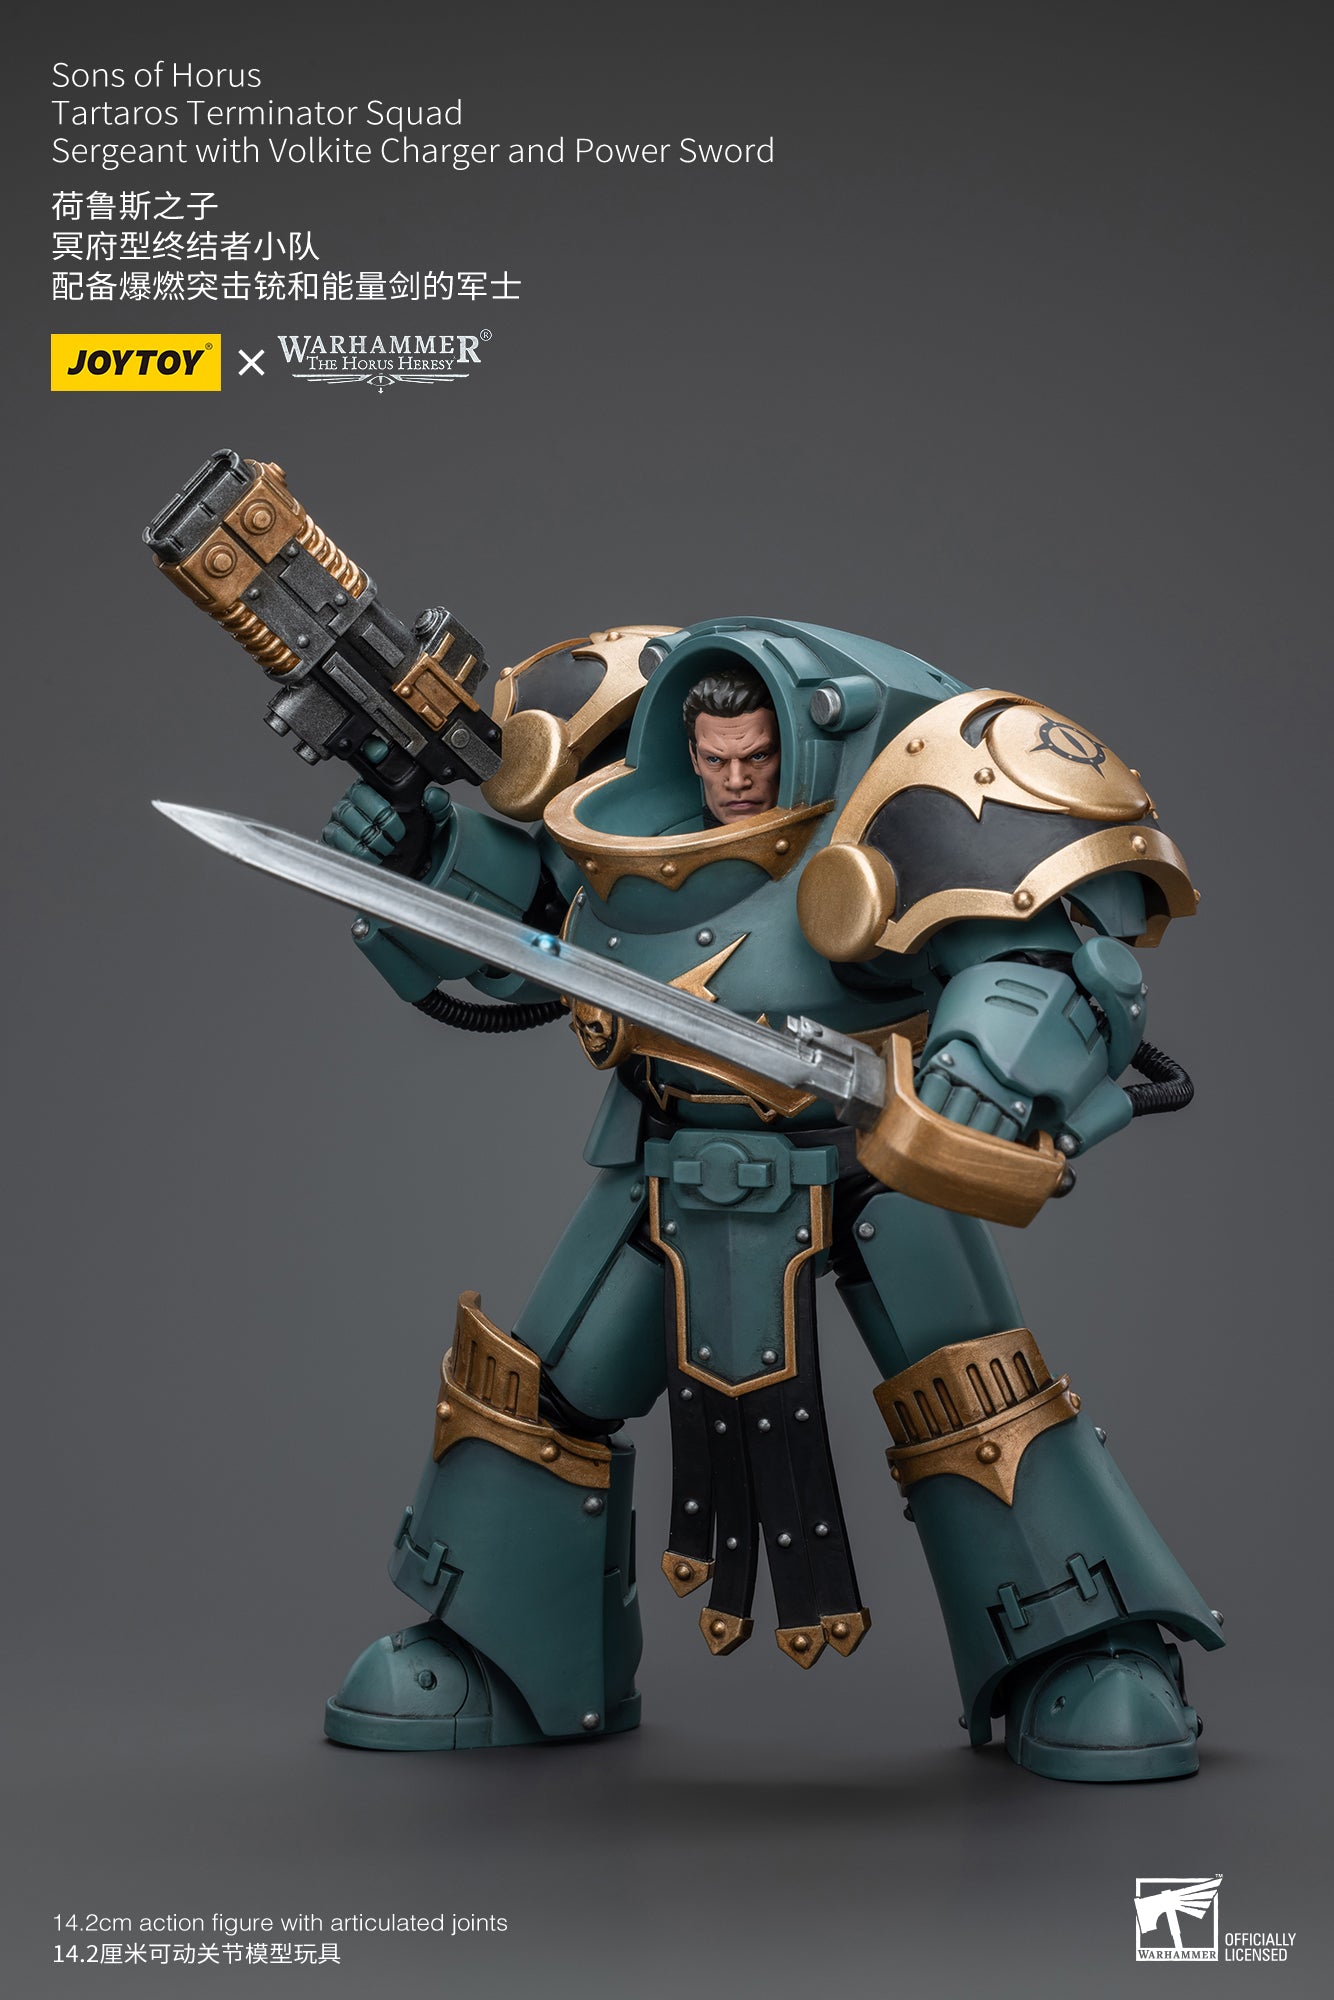 (Pre-Order) Warhammer The Horus Heresy Sons Of Horus Tartaros Terminator Squad Sergeant With Volkite Charger And Power Sword